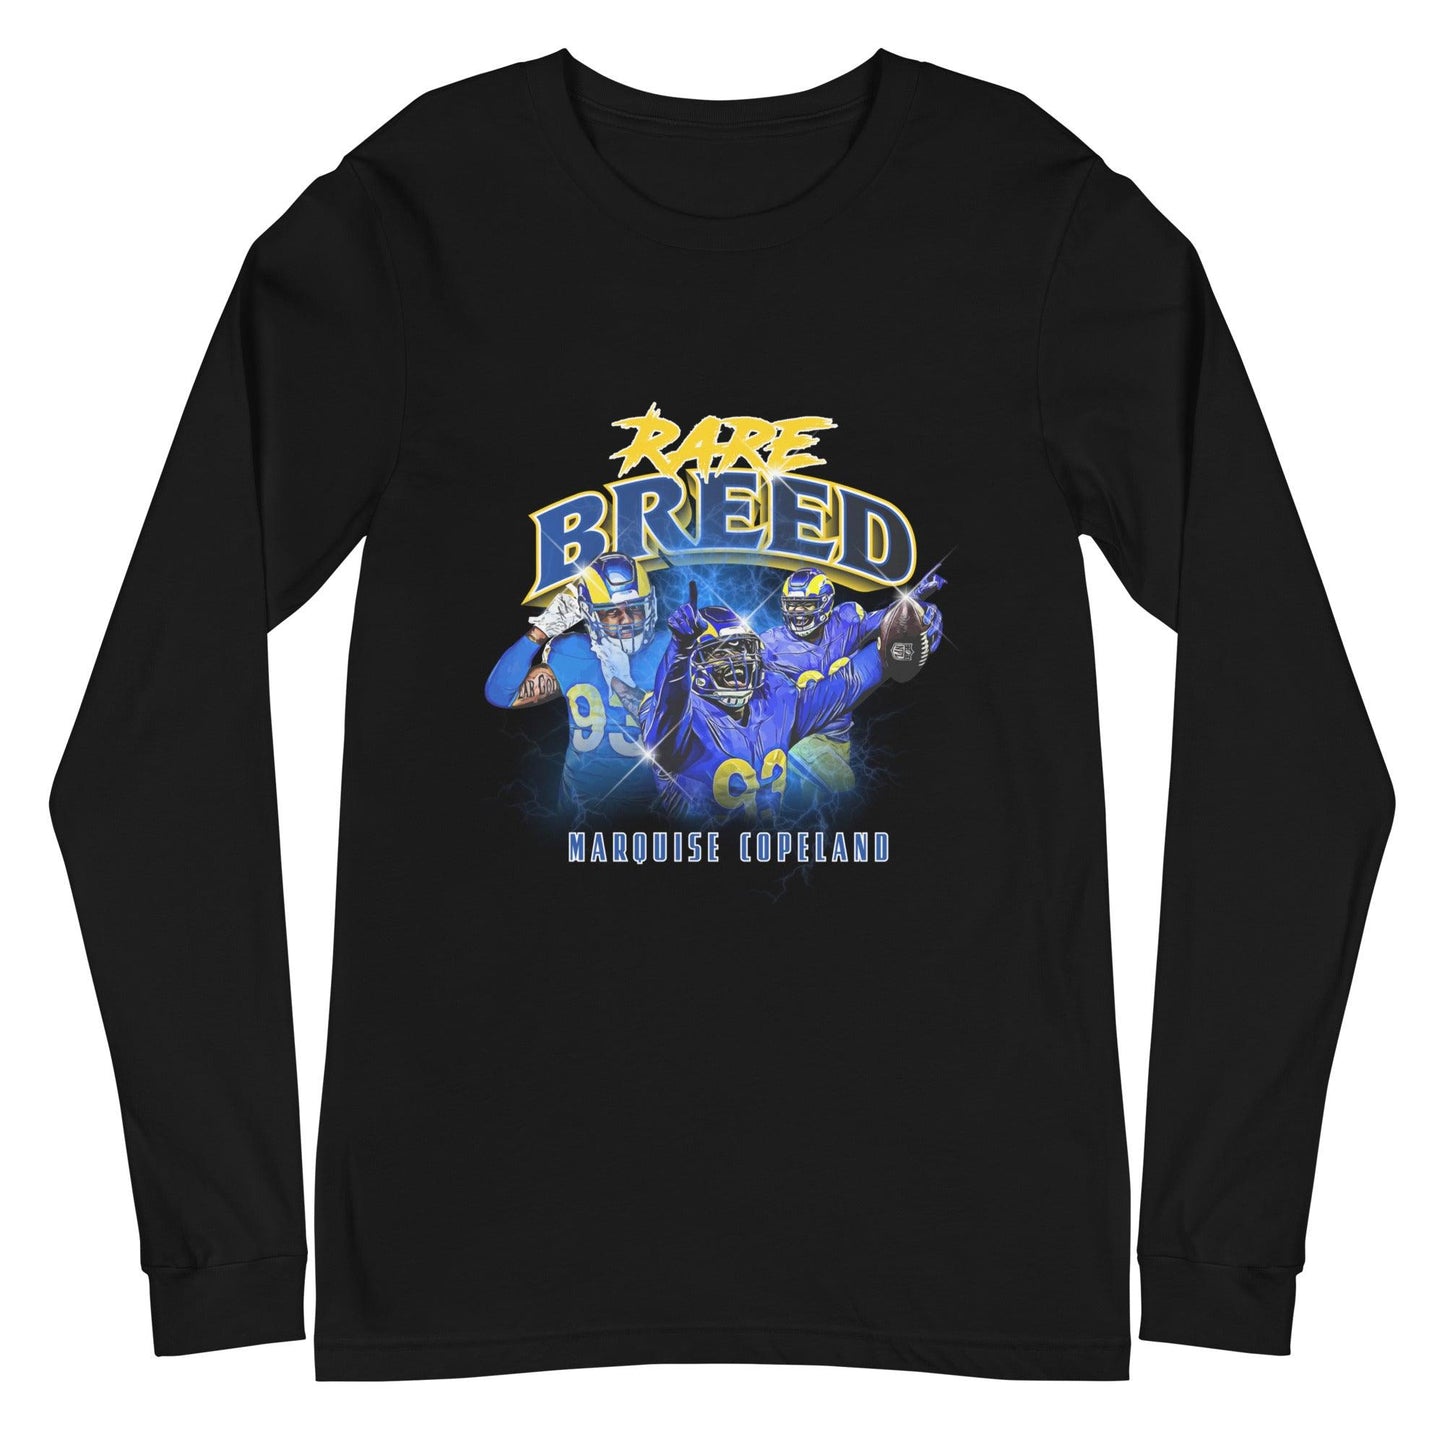 Marquise Copeland "Rare Breed" Long Sleeve Tee - Fan Arch